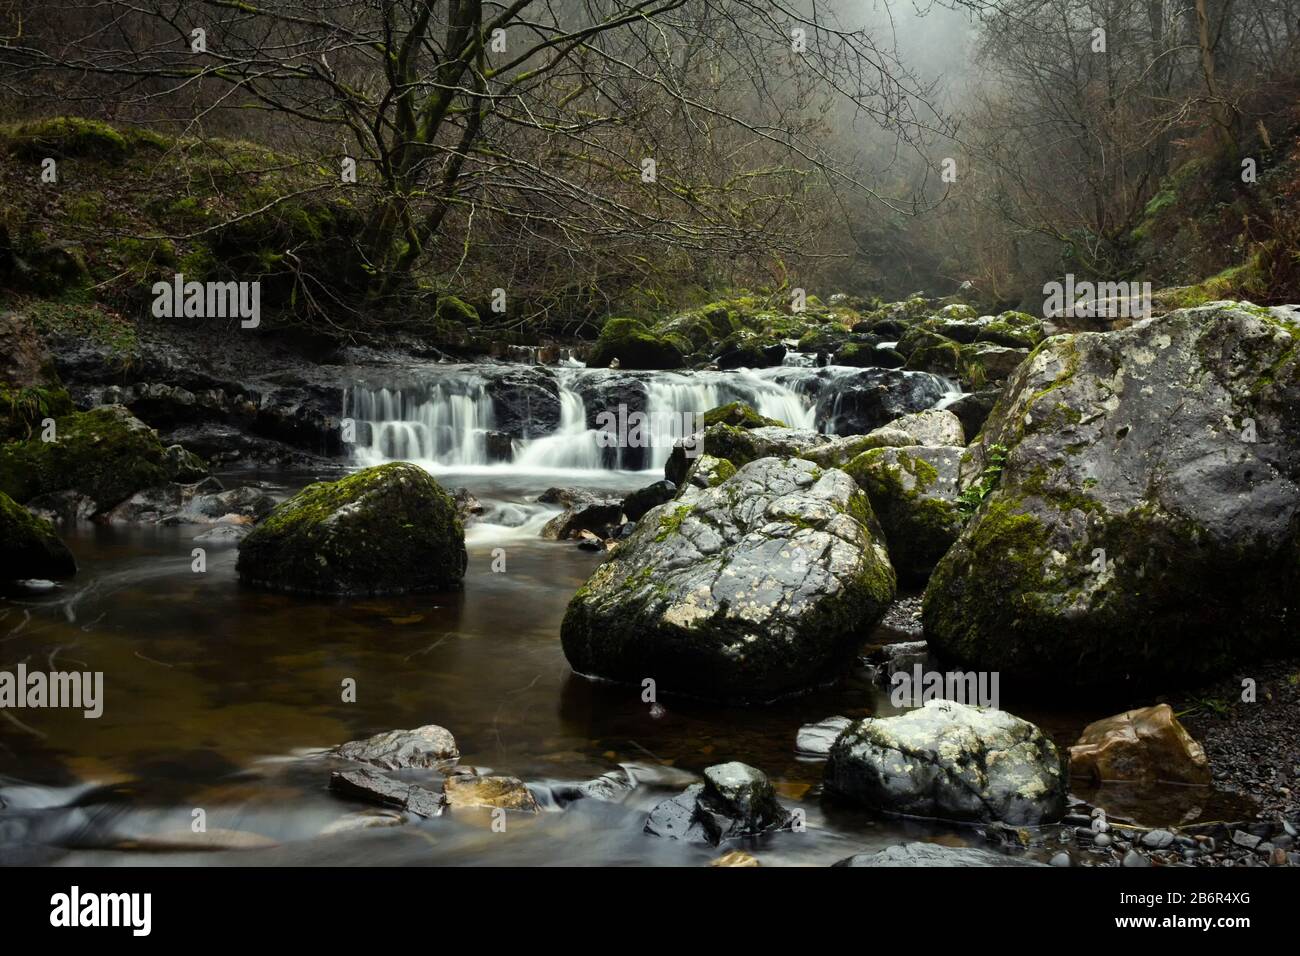 The a waterfall and river in Campsie Glan gorge in the west of Scotland. Stock Photo